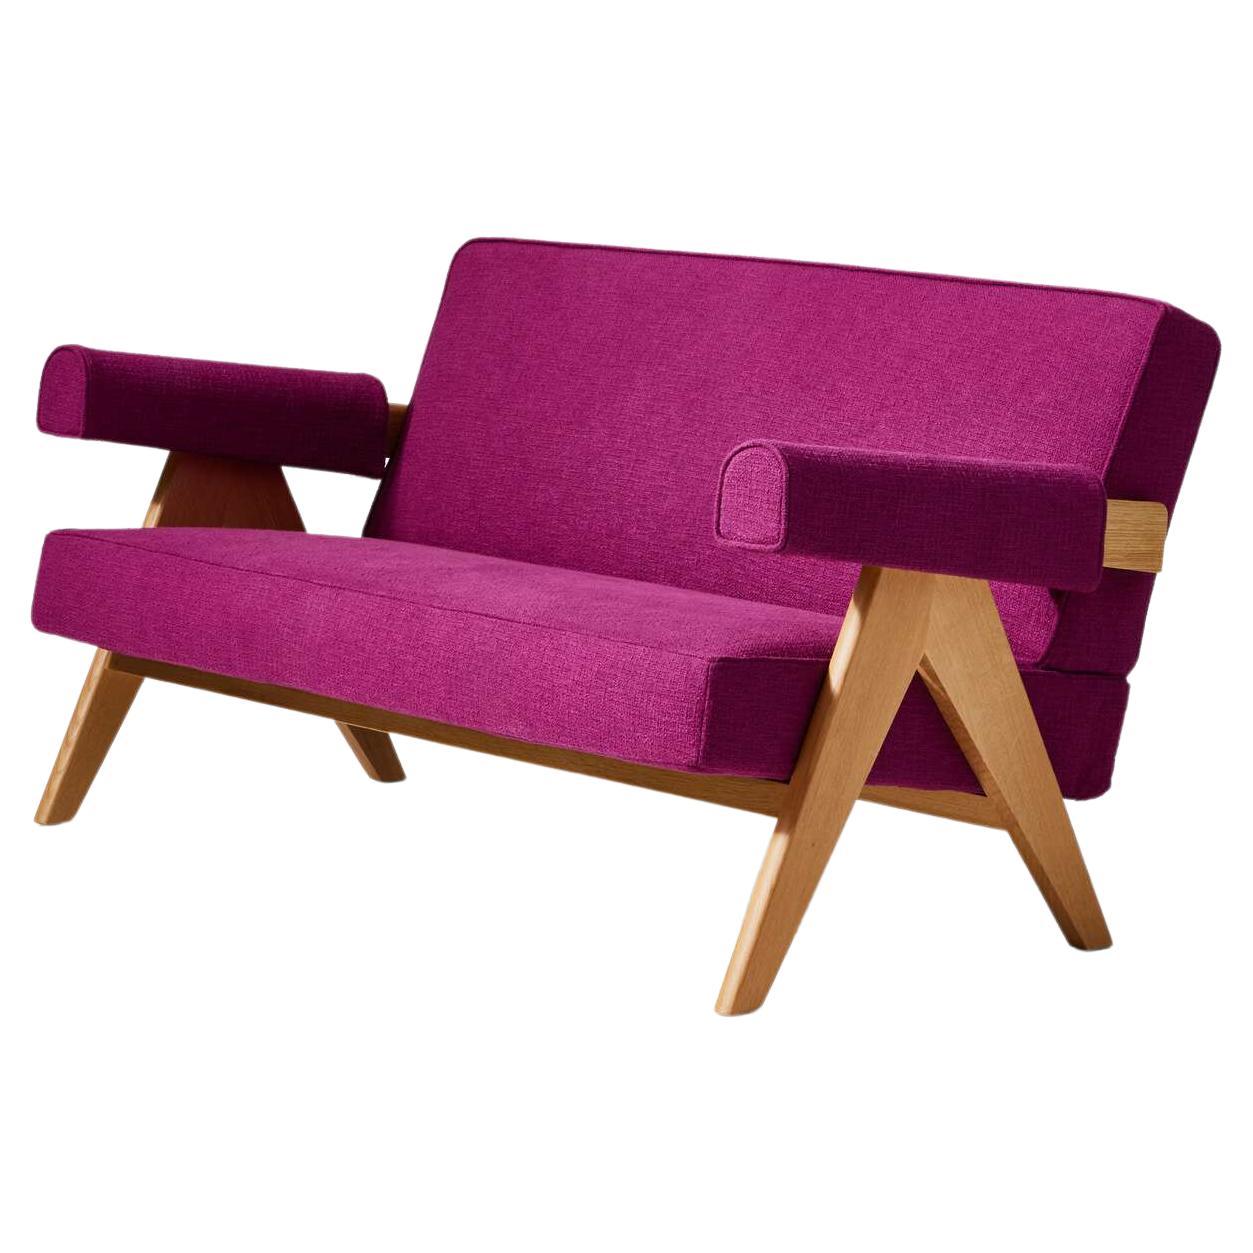 Pierre Jeanneret Capitol Complex Sofa Settee in Purple for Cassina, Italy - New 